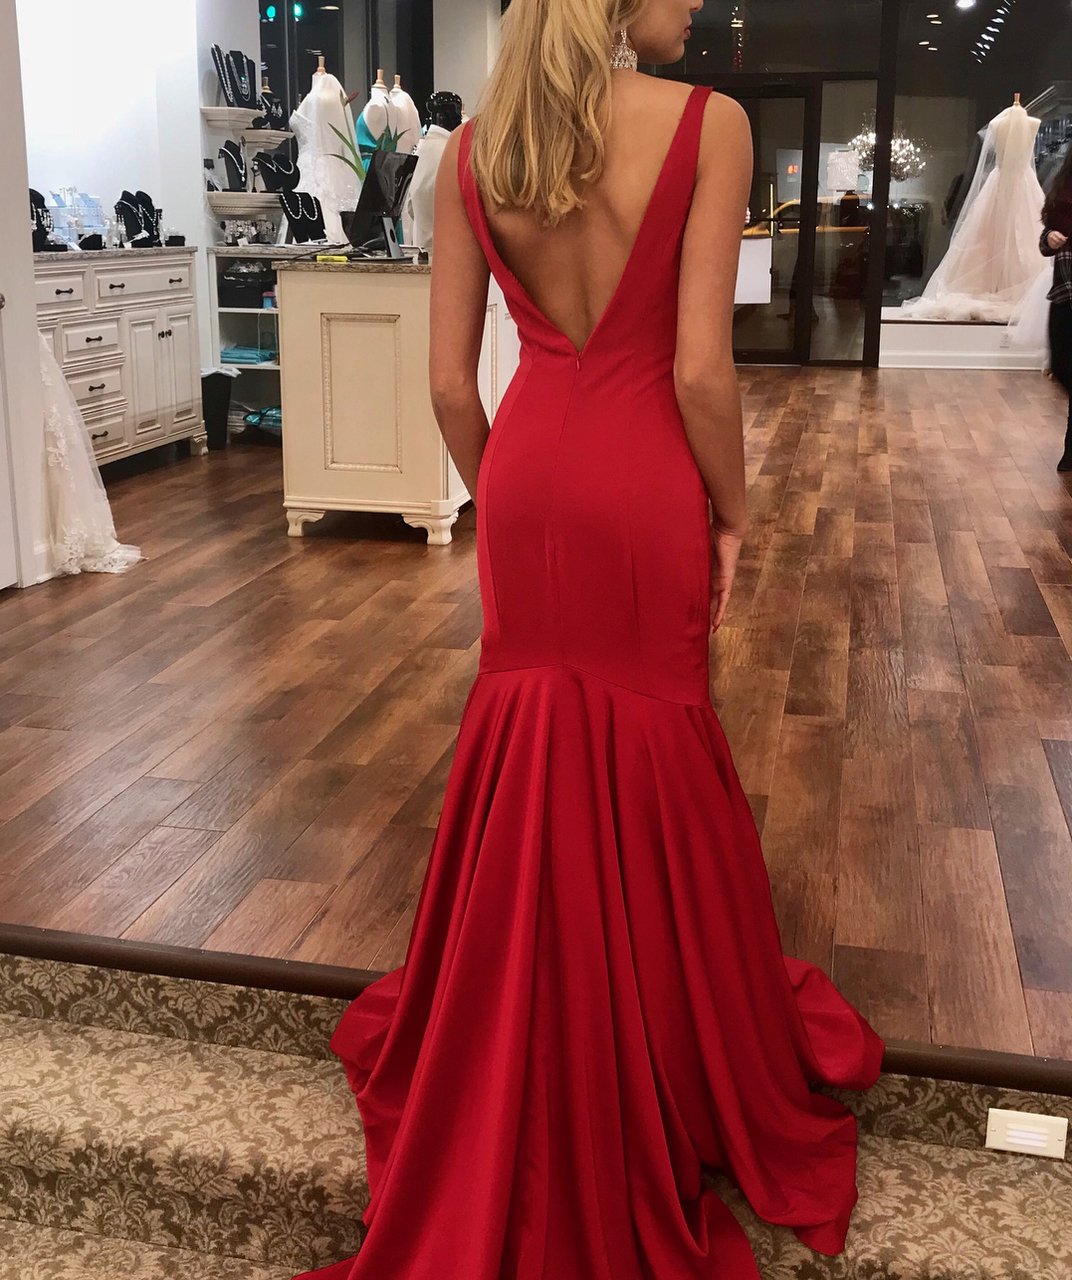 Sexy Mermaid Red V Neck Backless Long Elastic Satin Prom Dresses